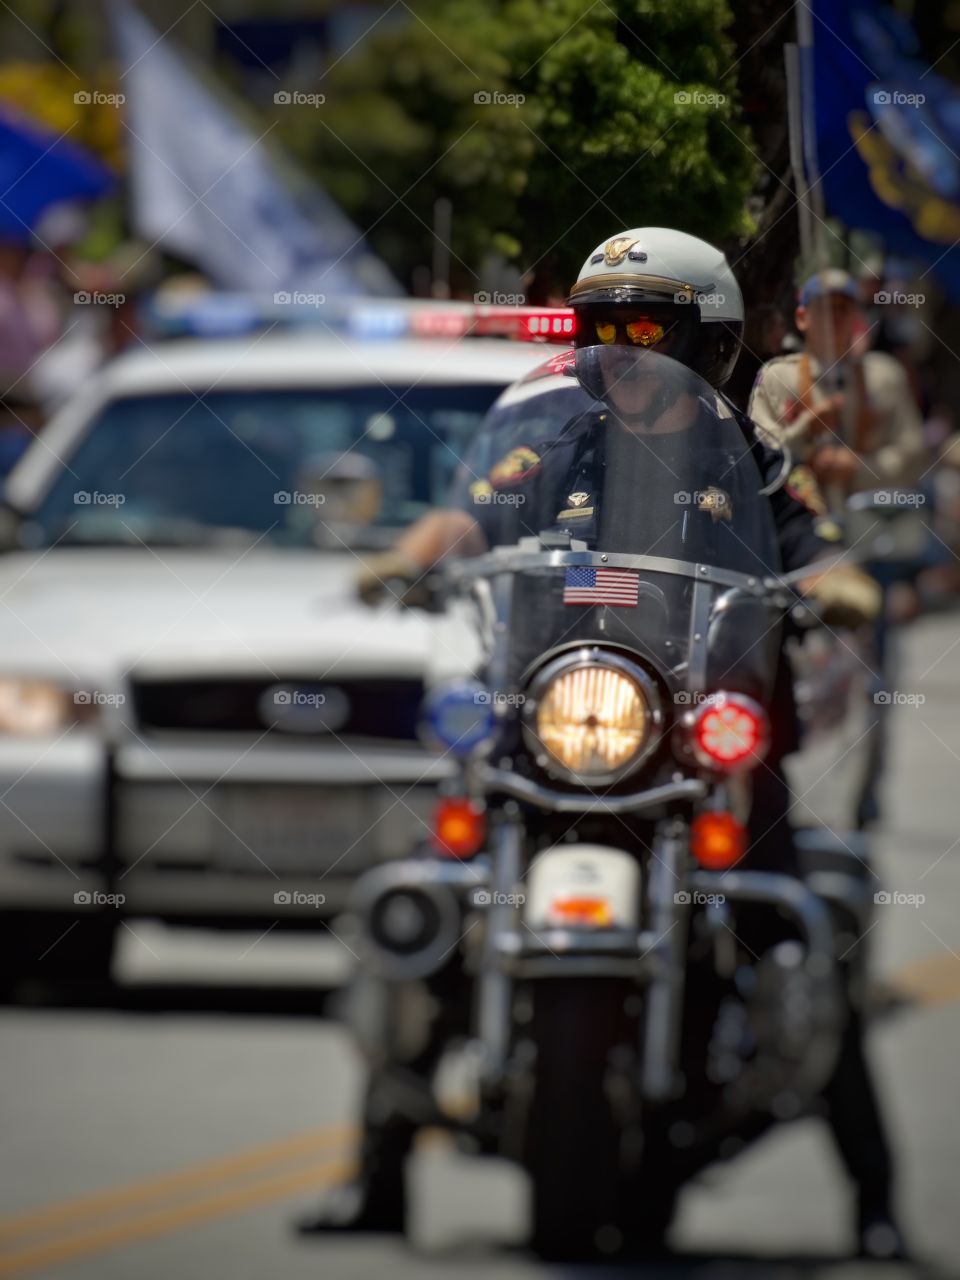 Motorcycle Police. American Police Officer On A Motorcycle
